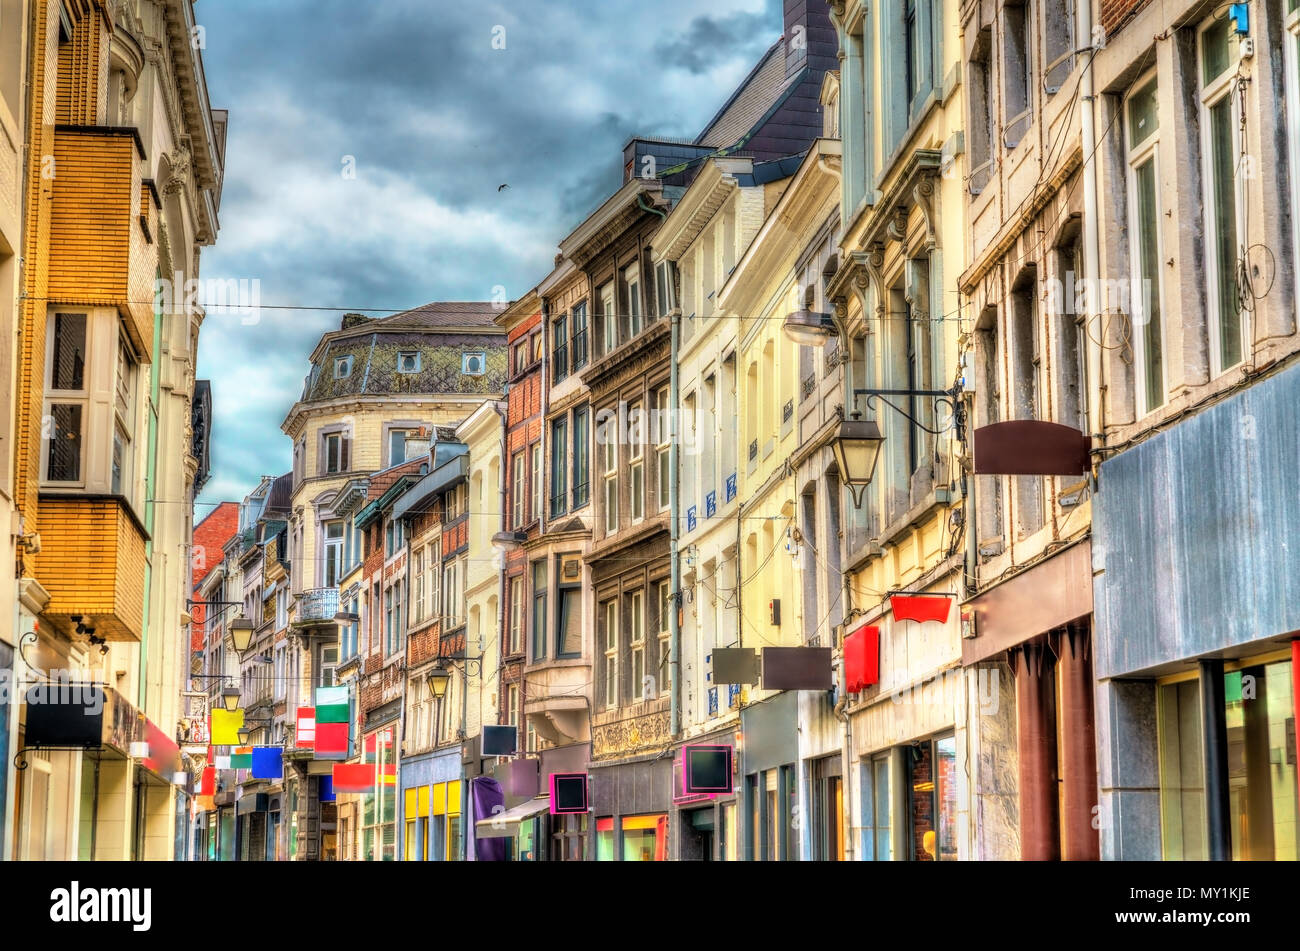 Typical buildings in the city centre of Liege, Belgium Stock Photo